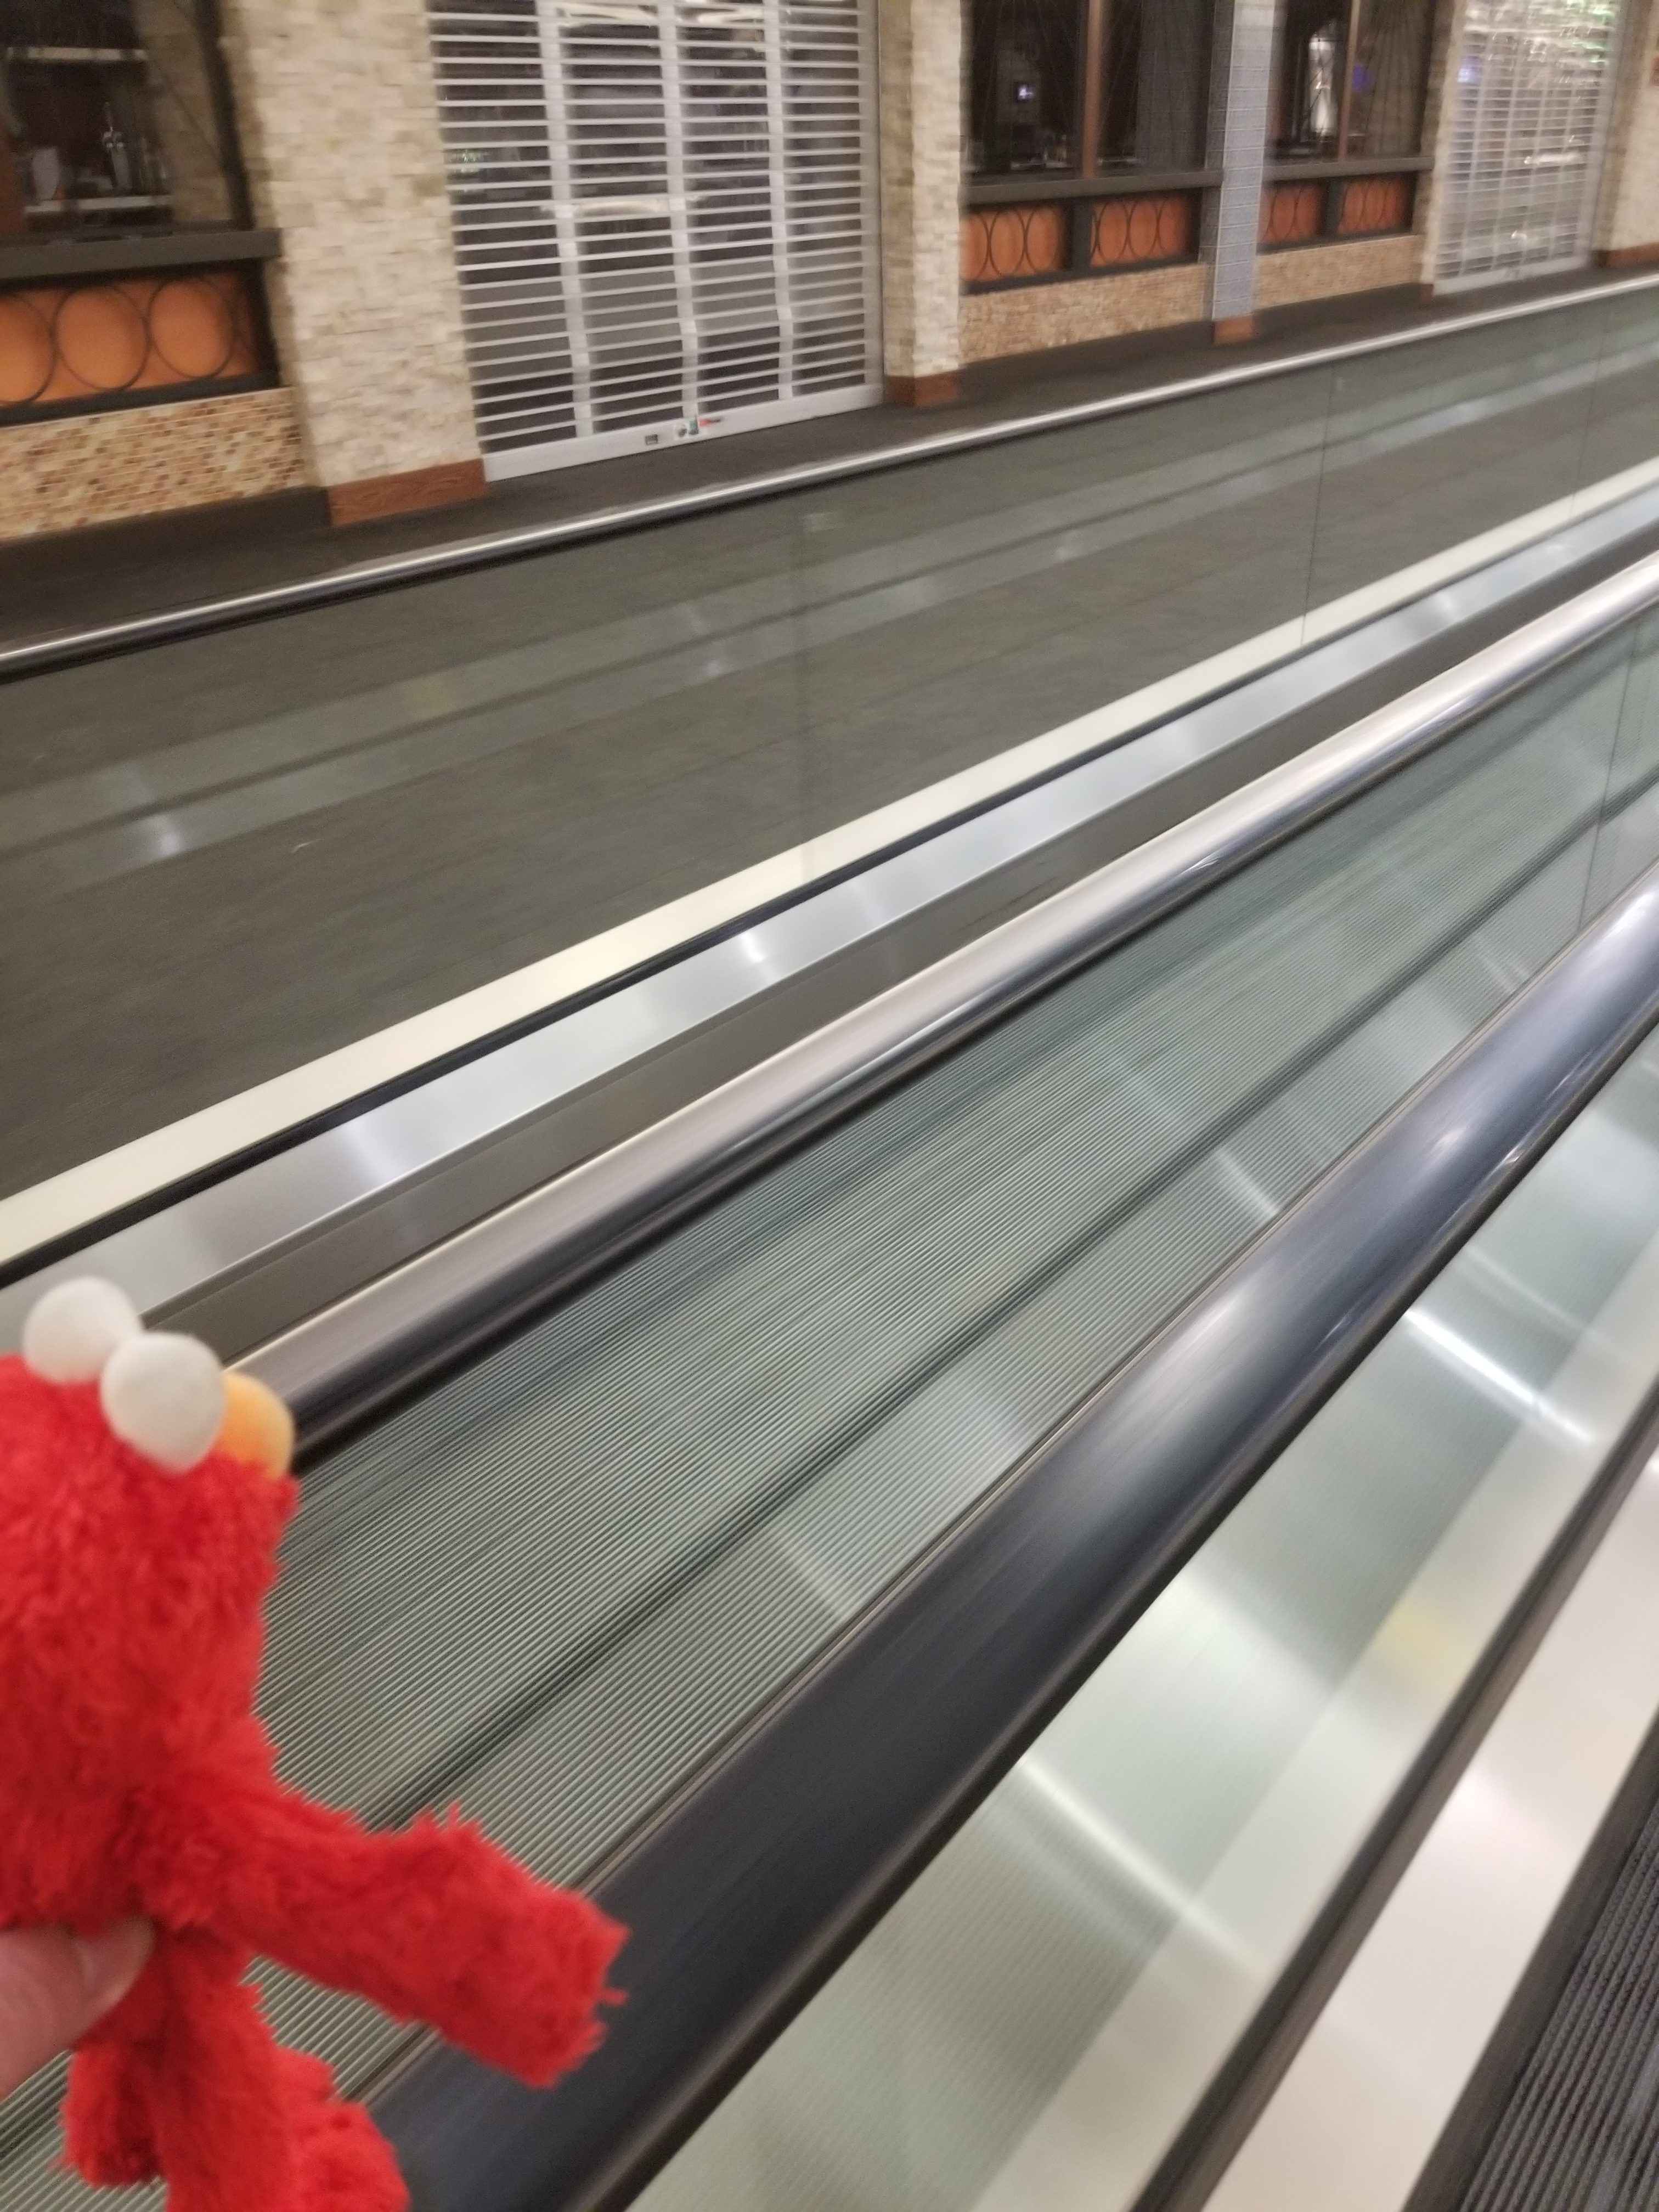 Elmo tries the People Mover